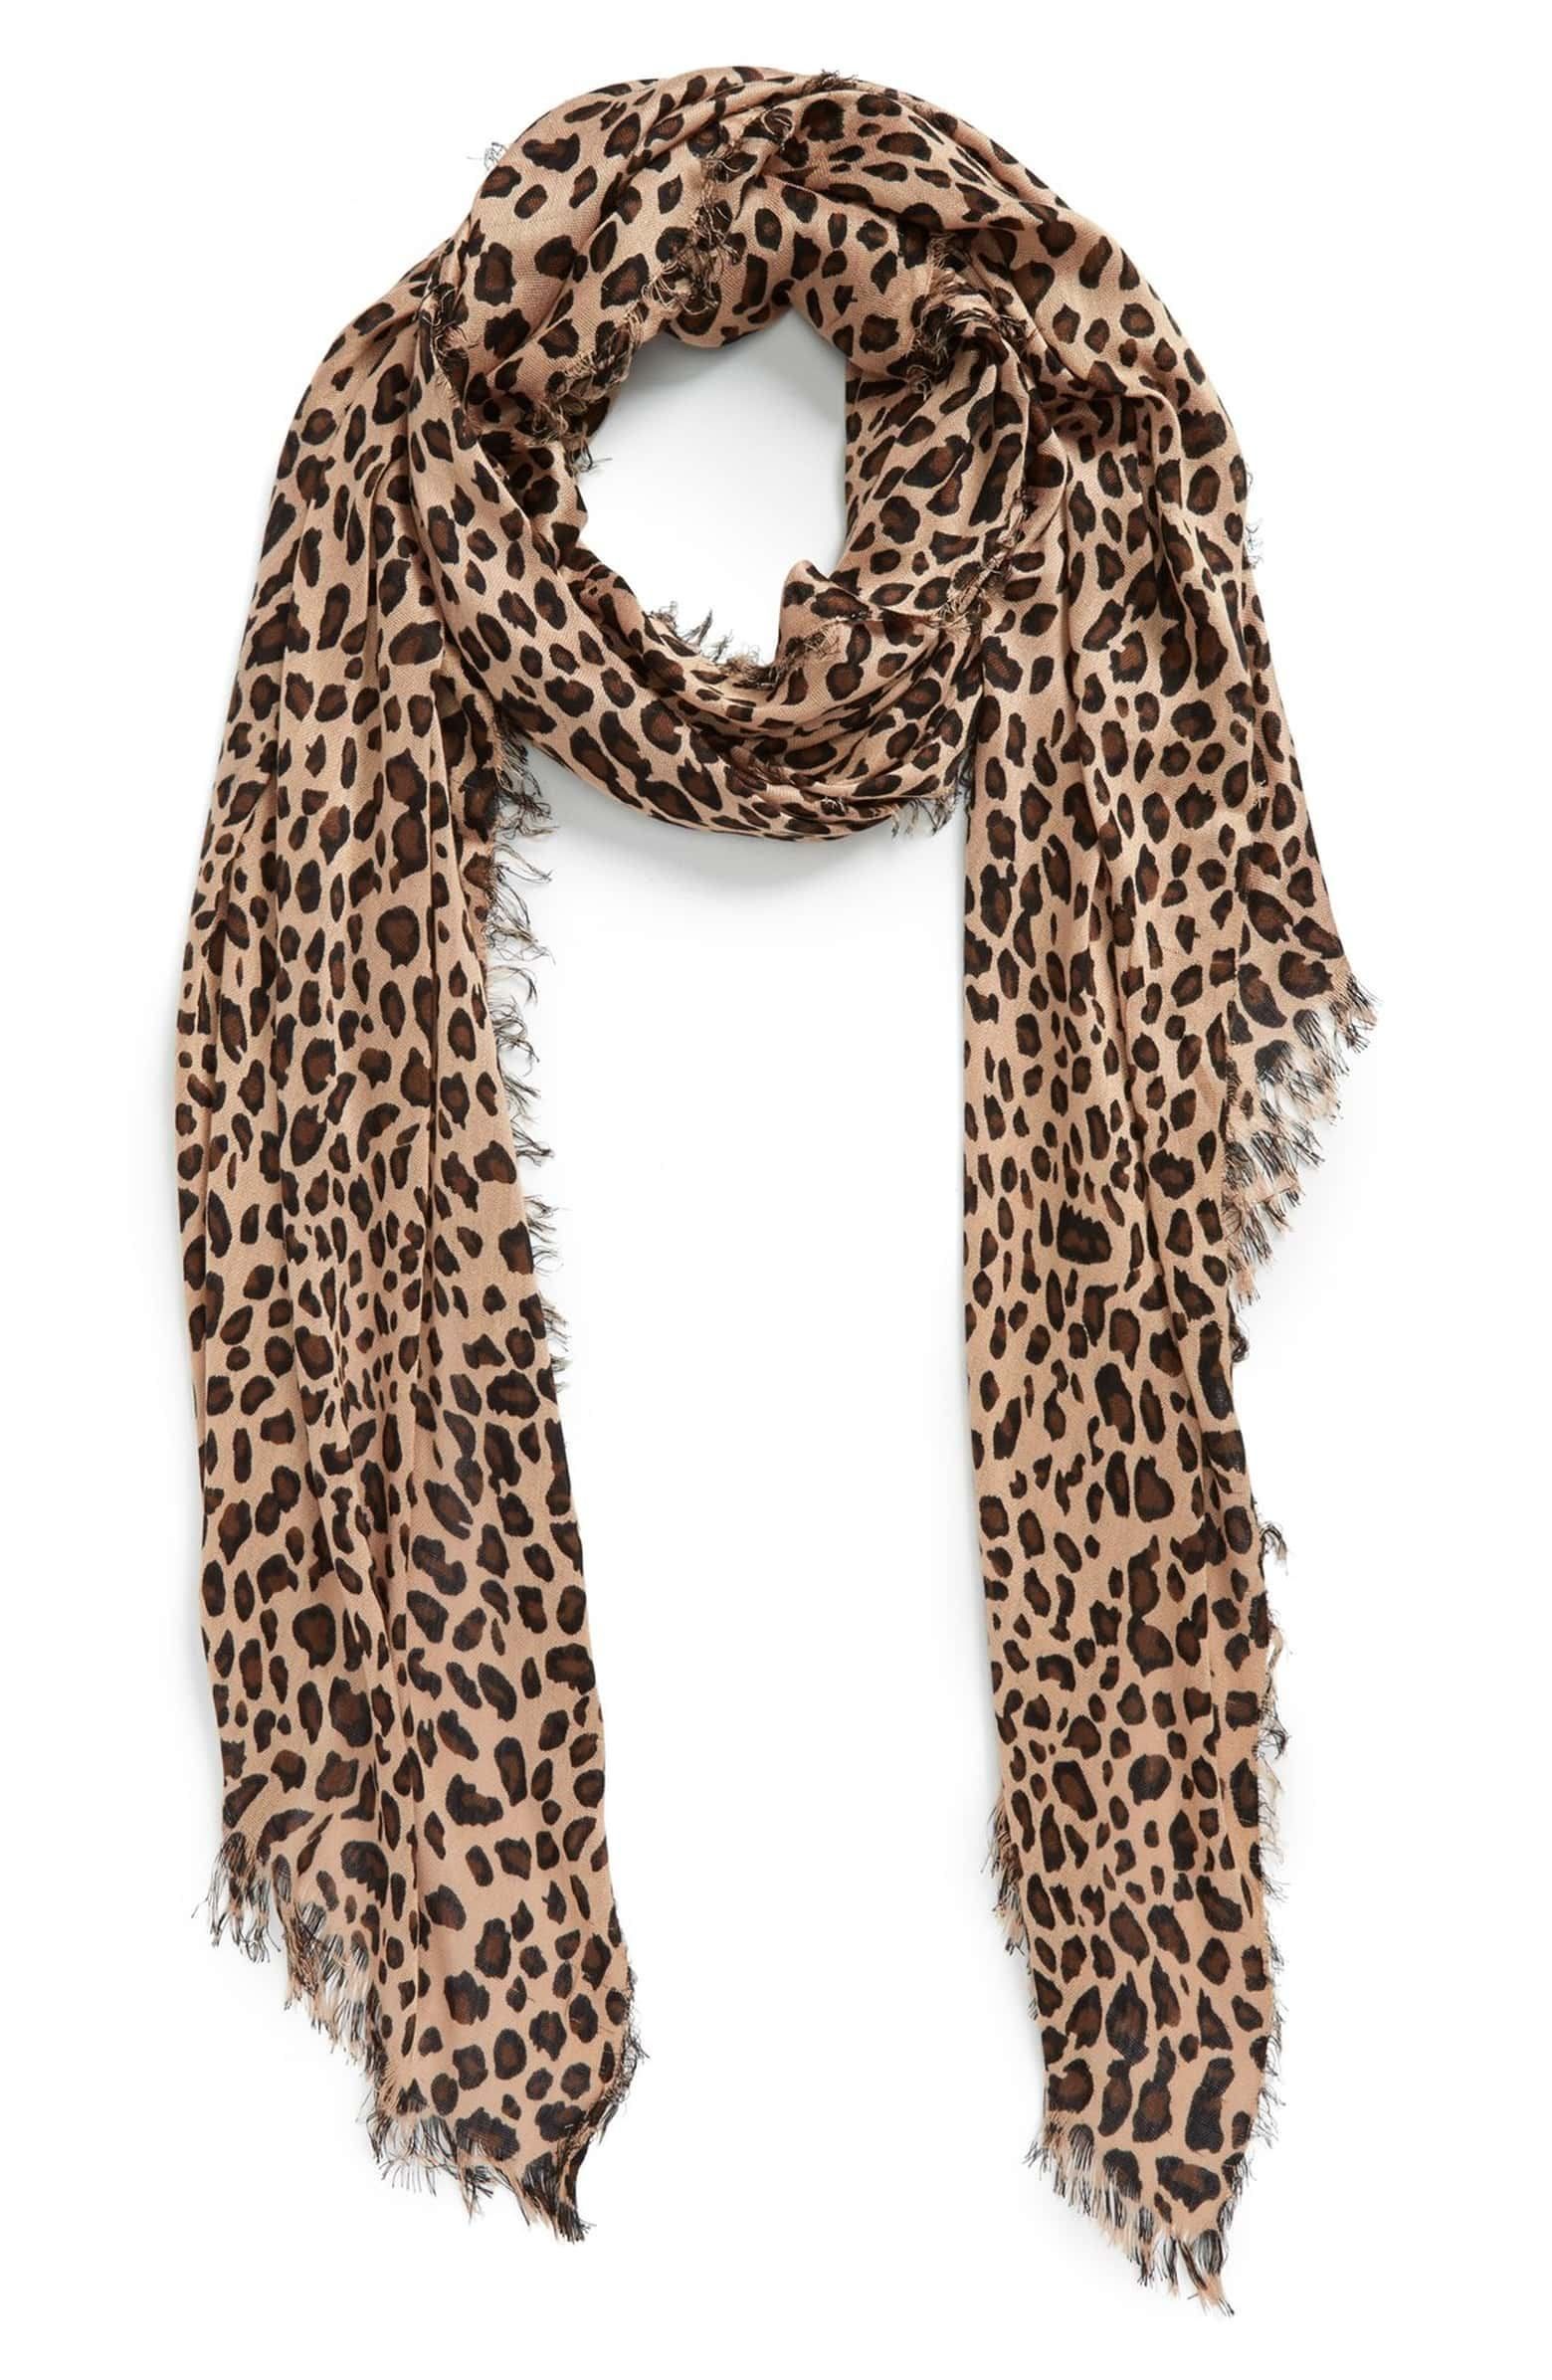 Leopard scarf to beat winter in a
different way